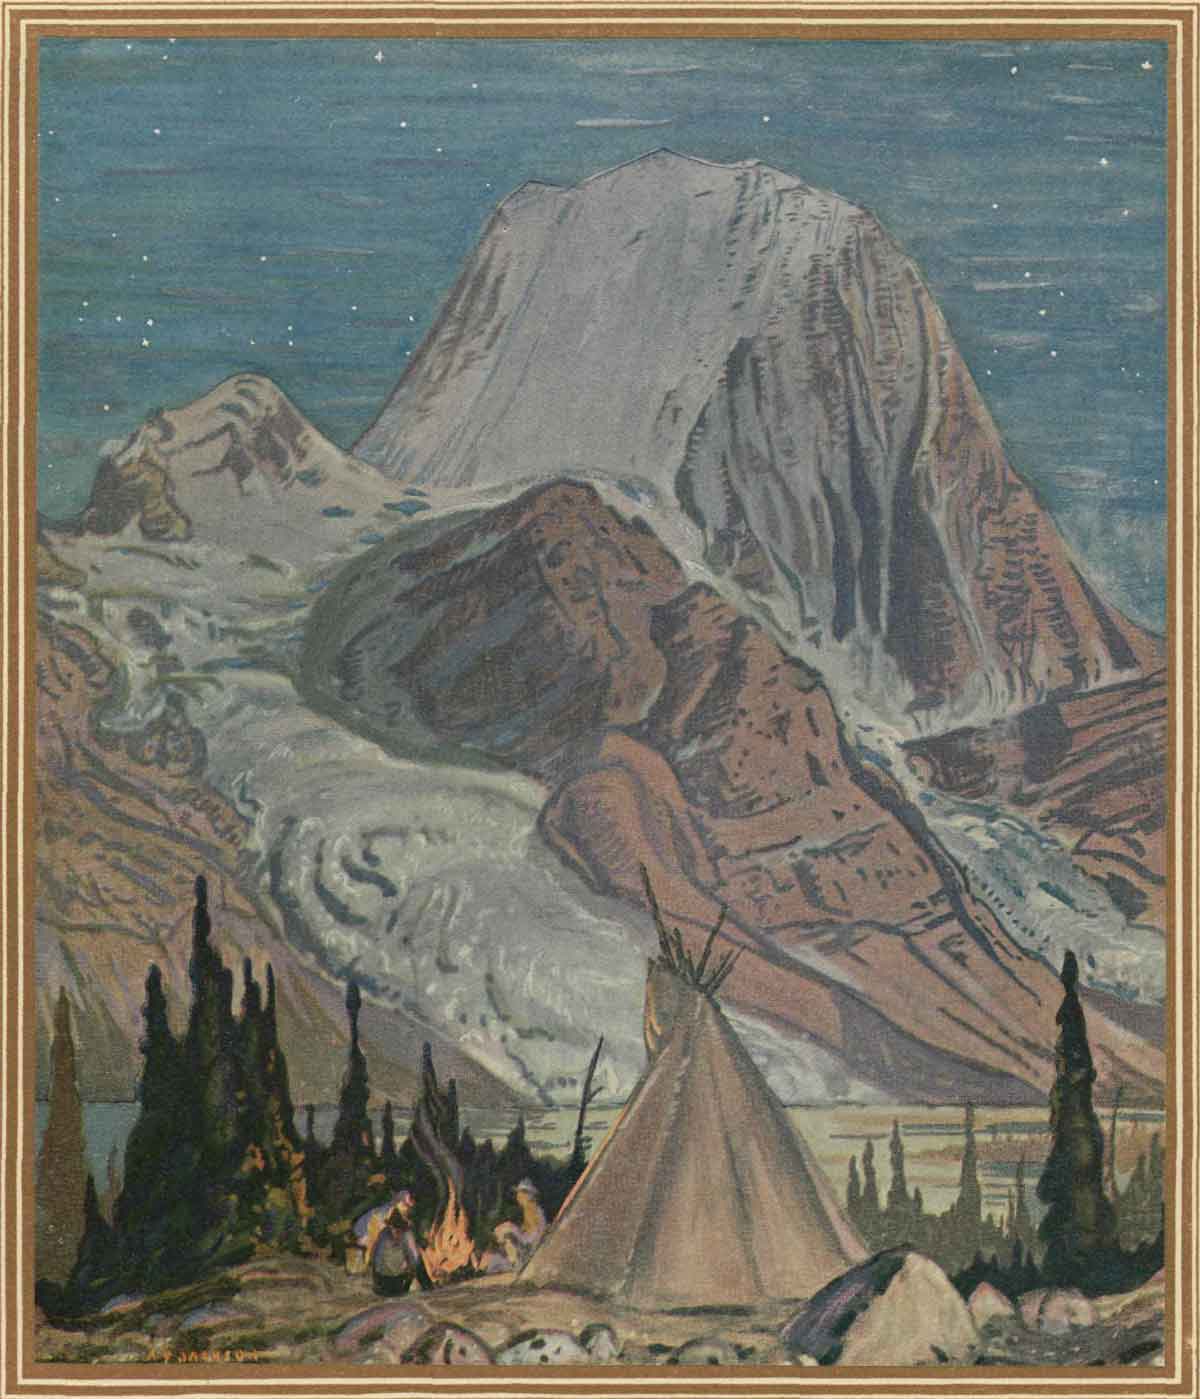 Mount Robson (12,.972 feet). The Monarch of the Canadian Rockies. A. Y. Jackson, 1927